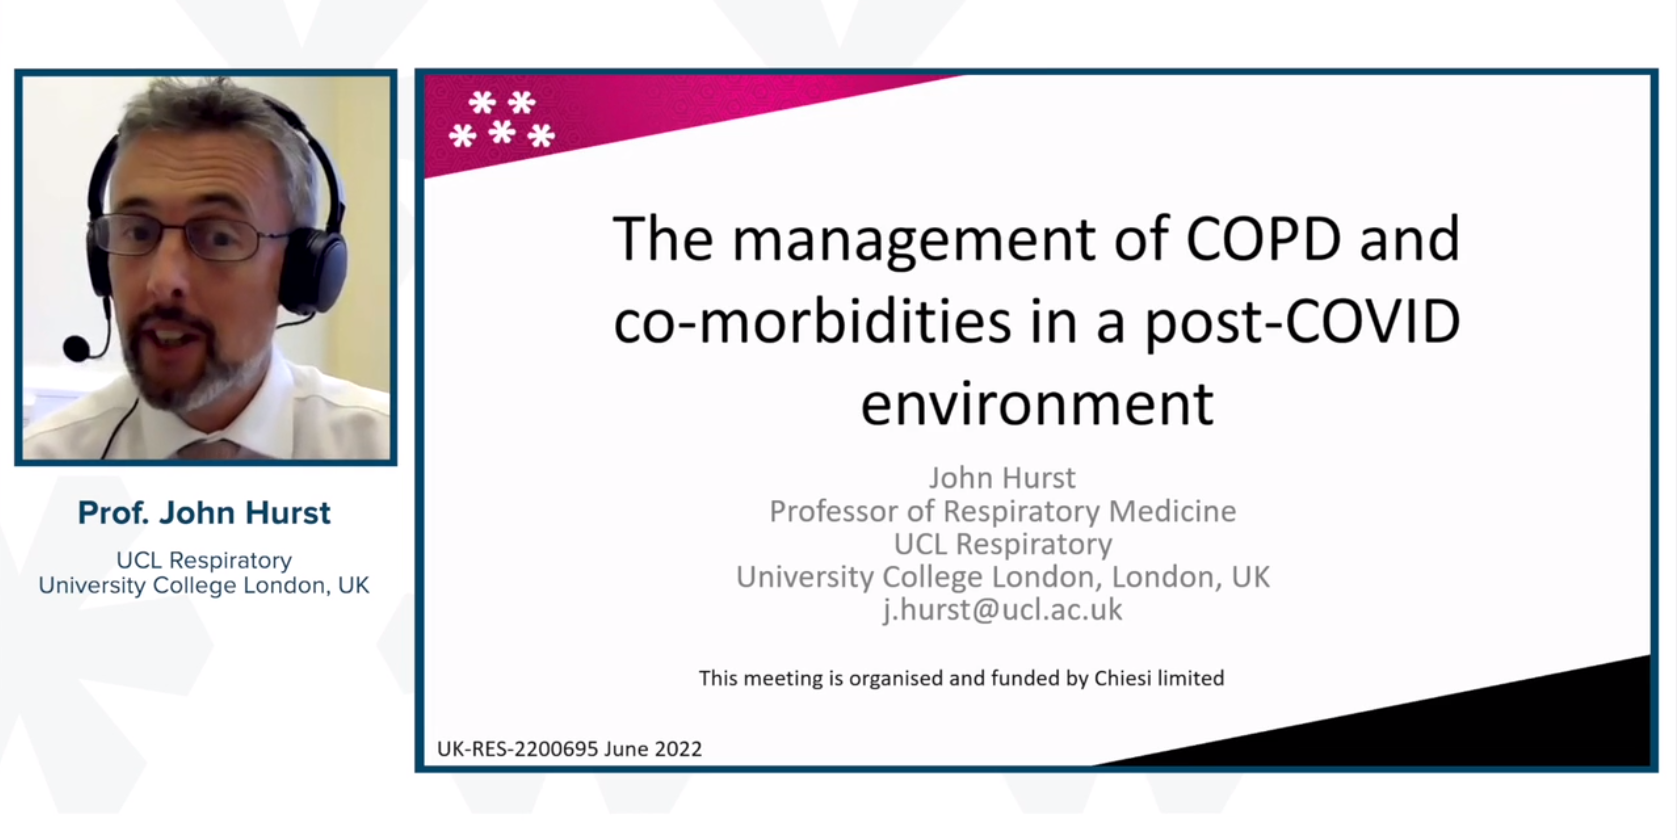 The Management of COPD and Co-morbidities in a Post-COVID Environment